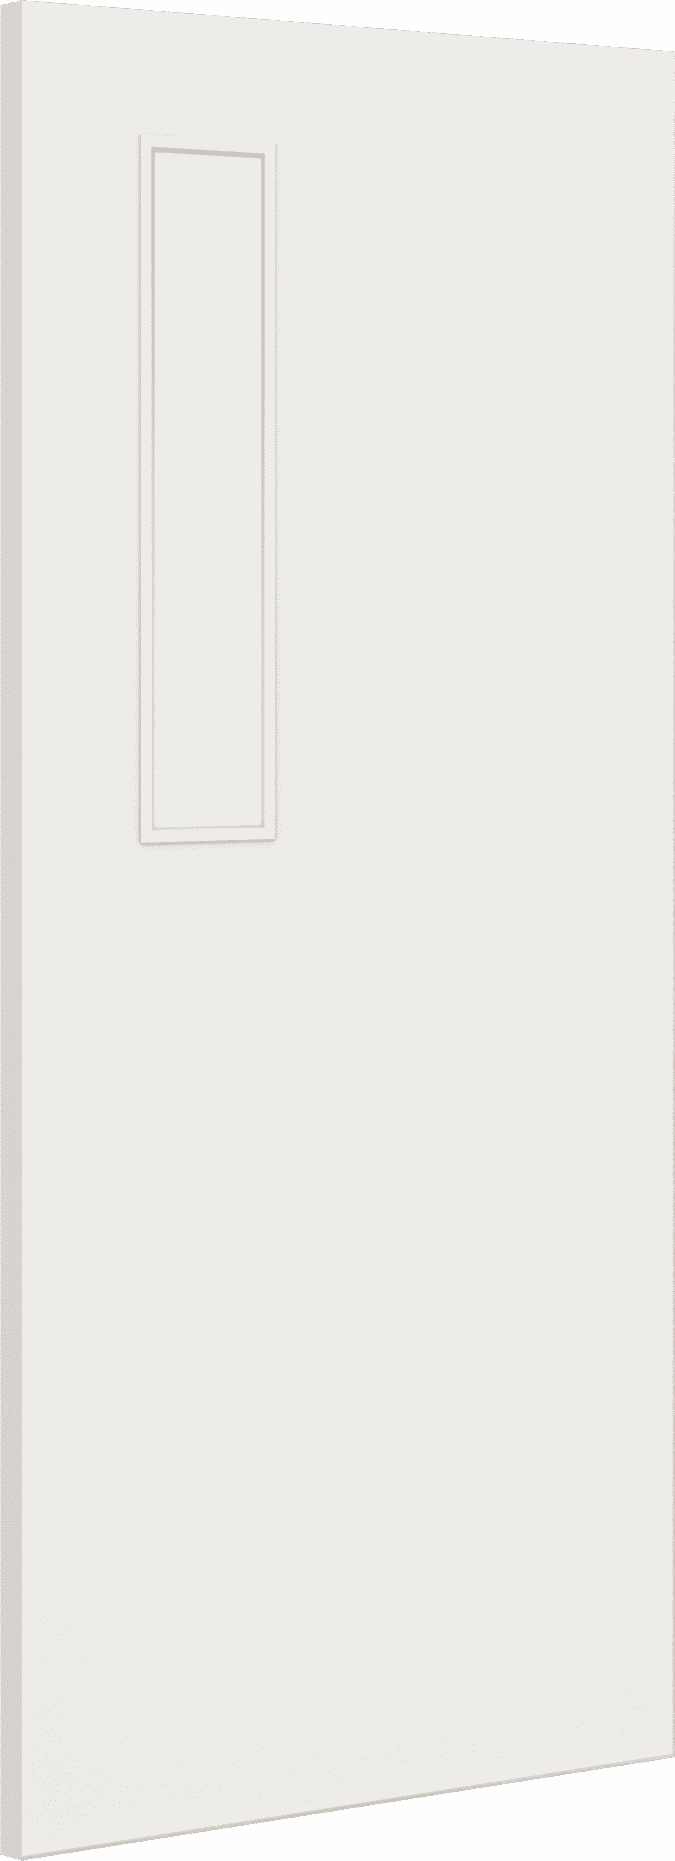 2040mm x 626mm x 44mm Architectural Paint Grade White 08 Clear Glazed Fire Door Blank